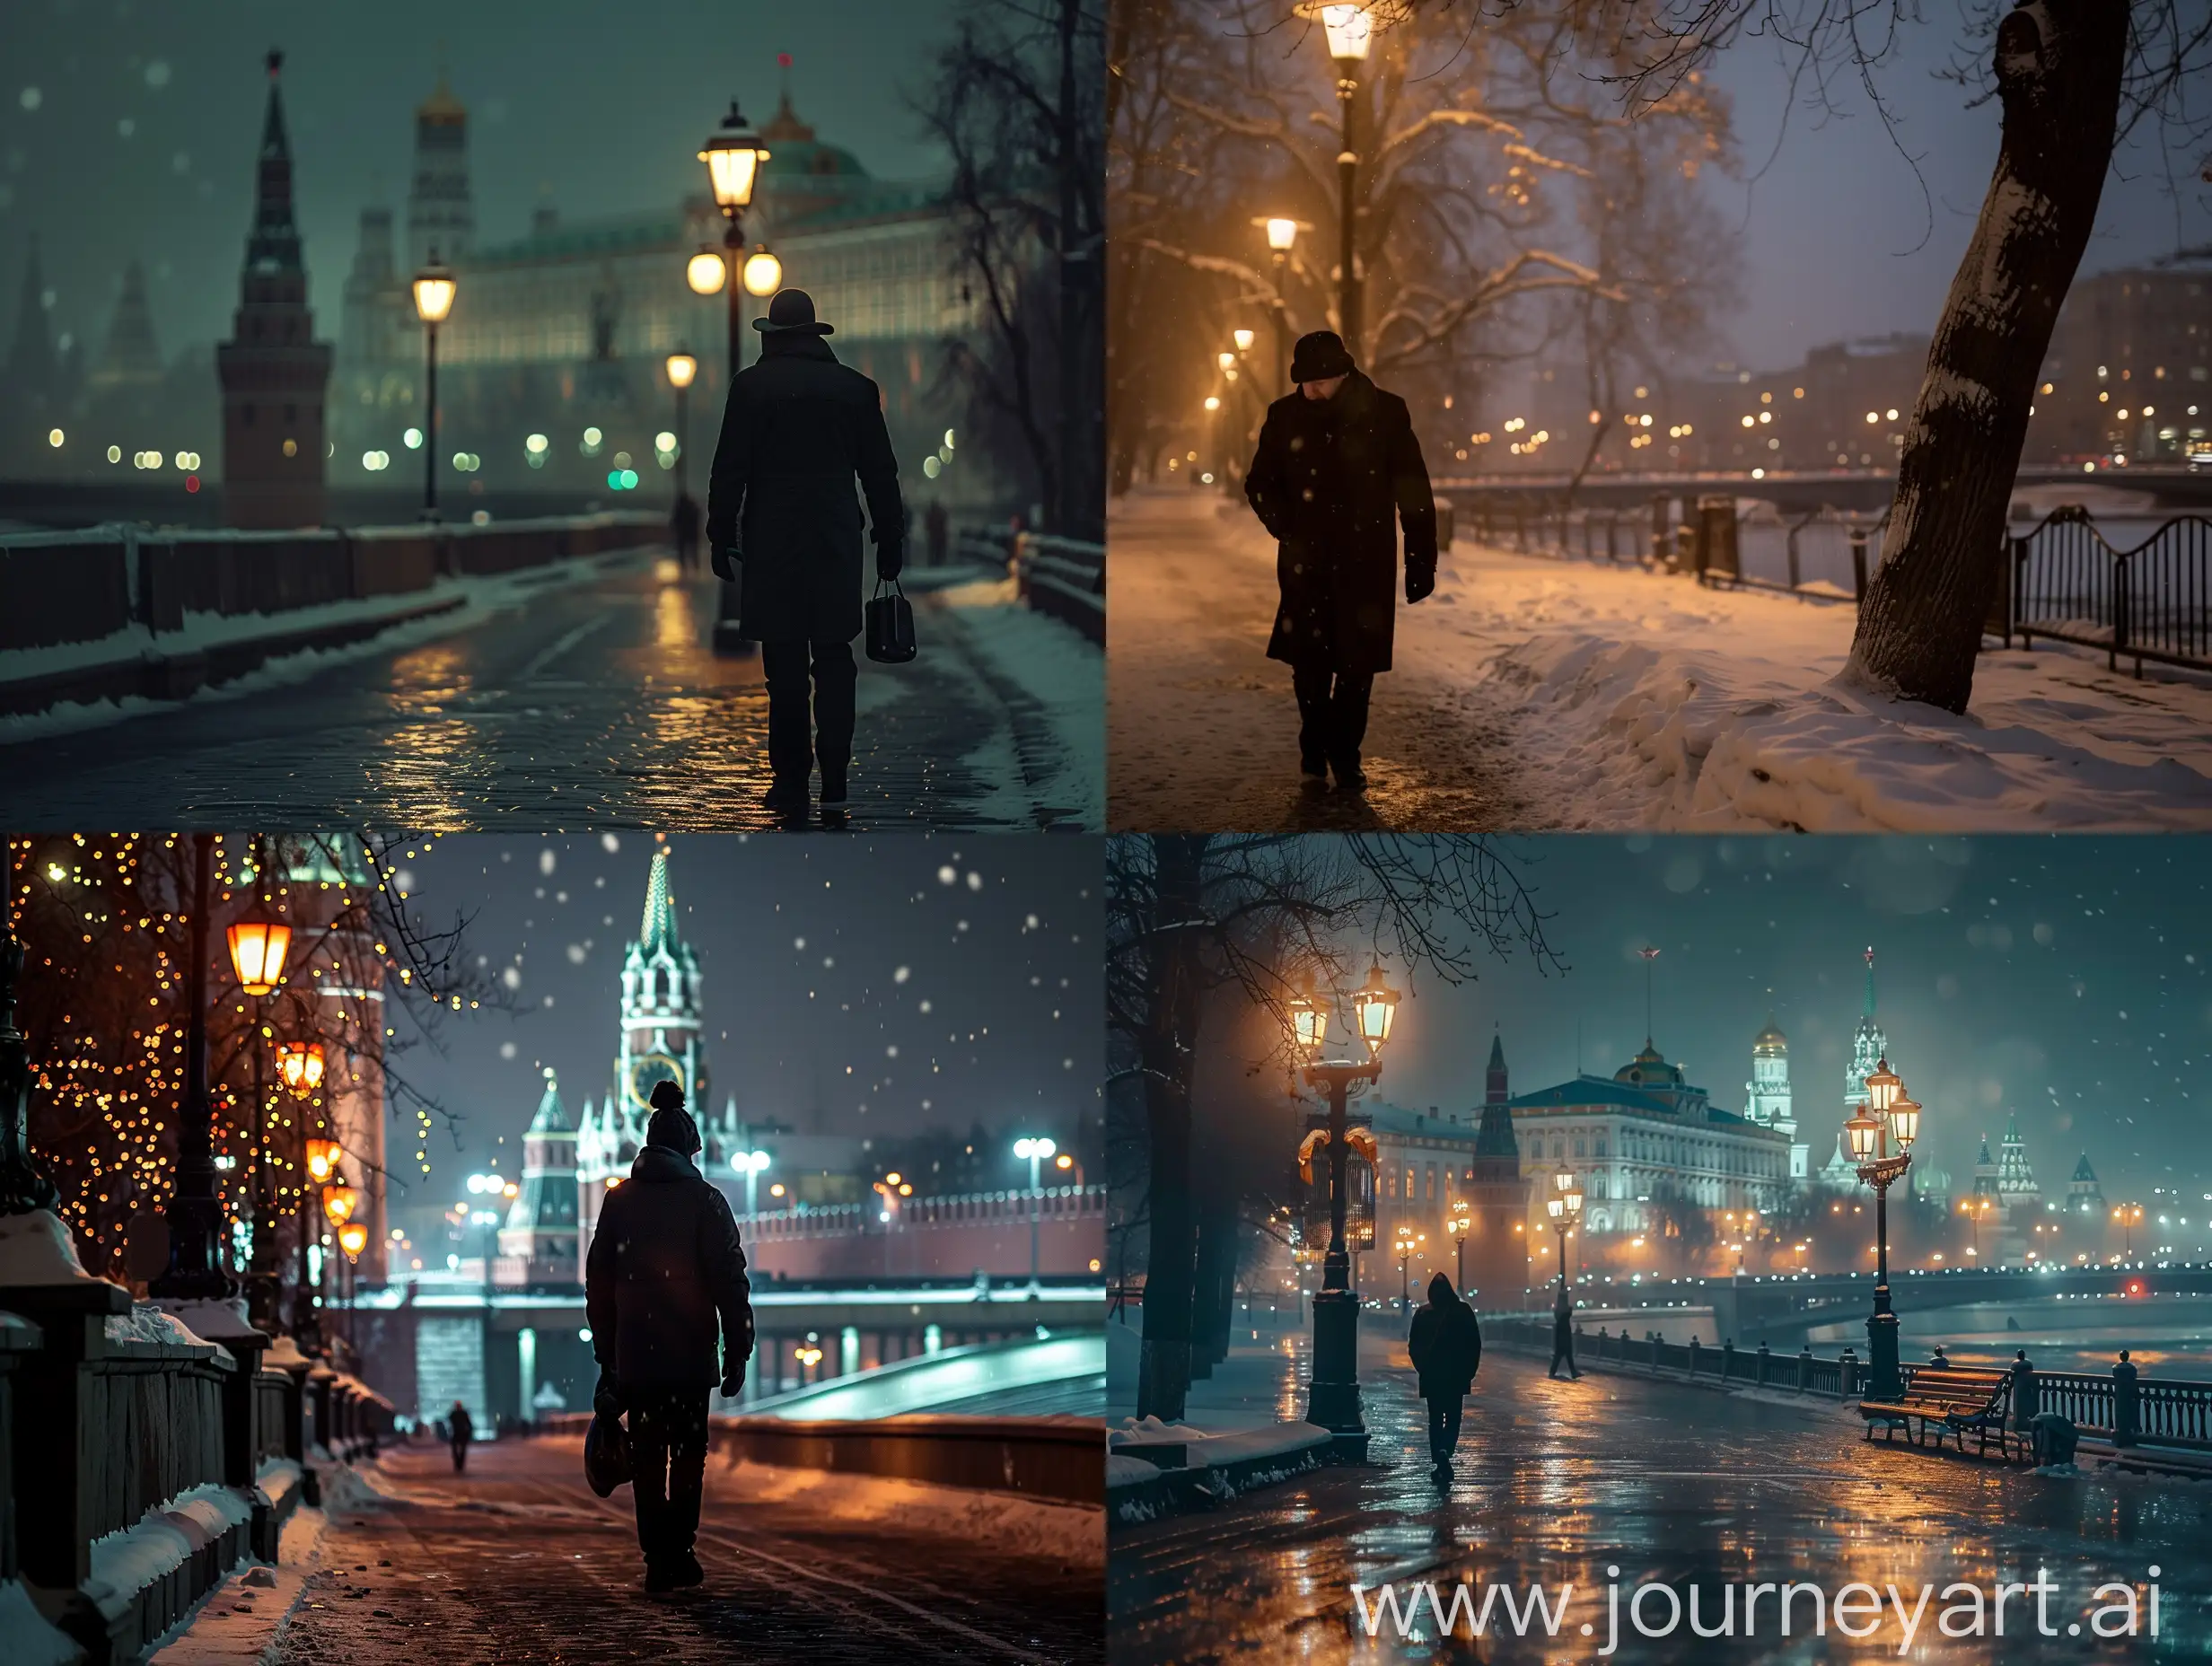 Pedro-Sanchez-Strolls-Through-Moscow-at-Night-in-Cinematic-Lighting